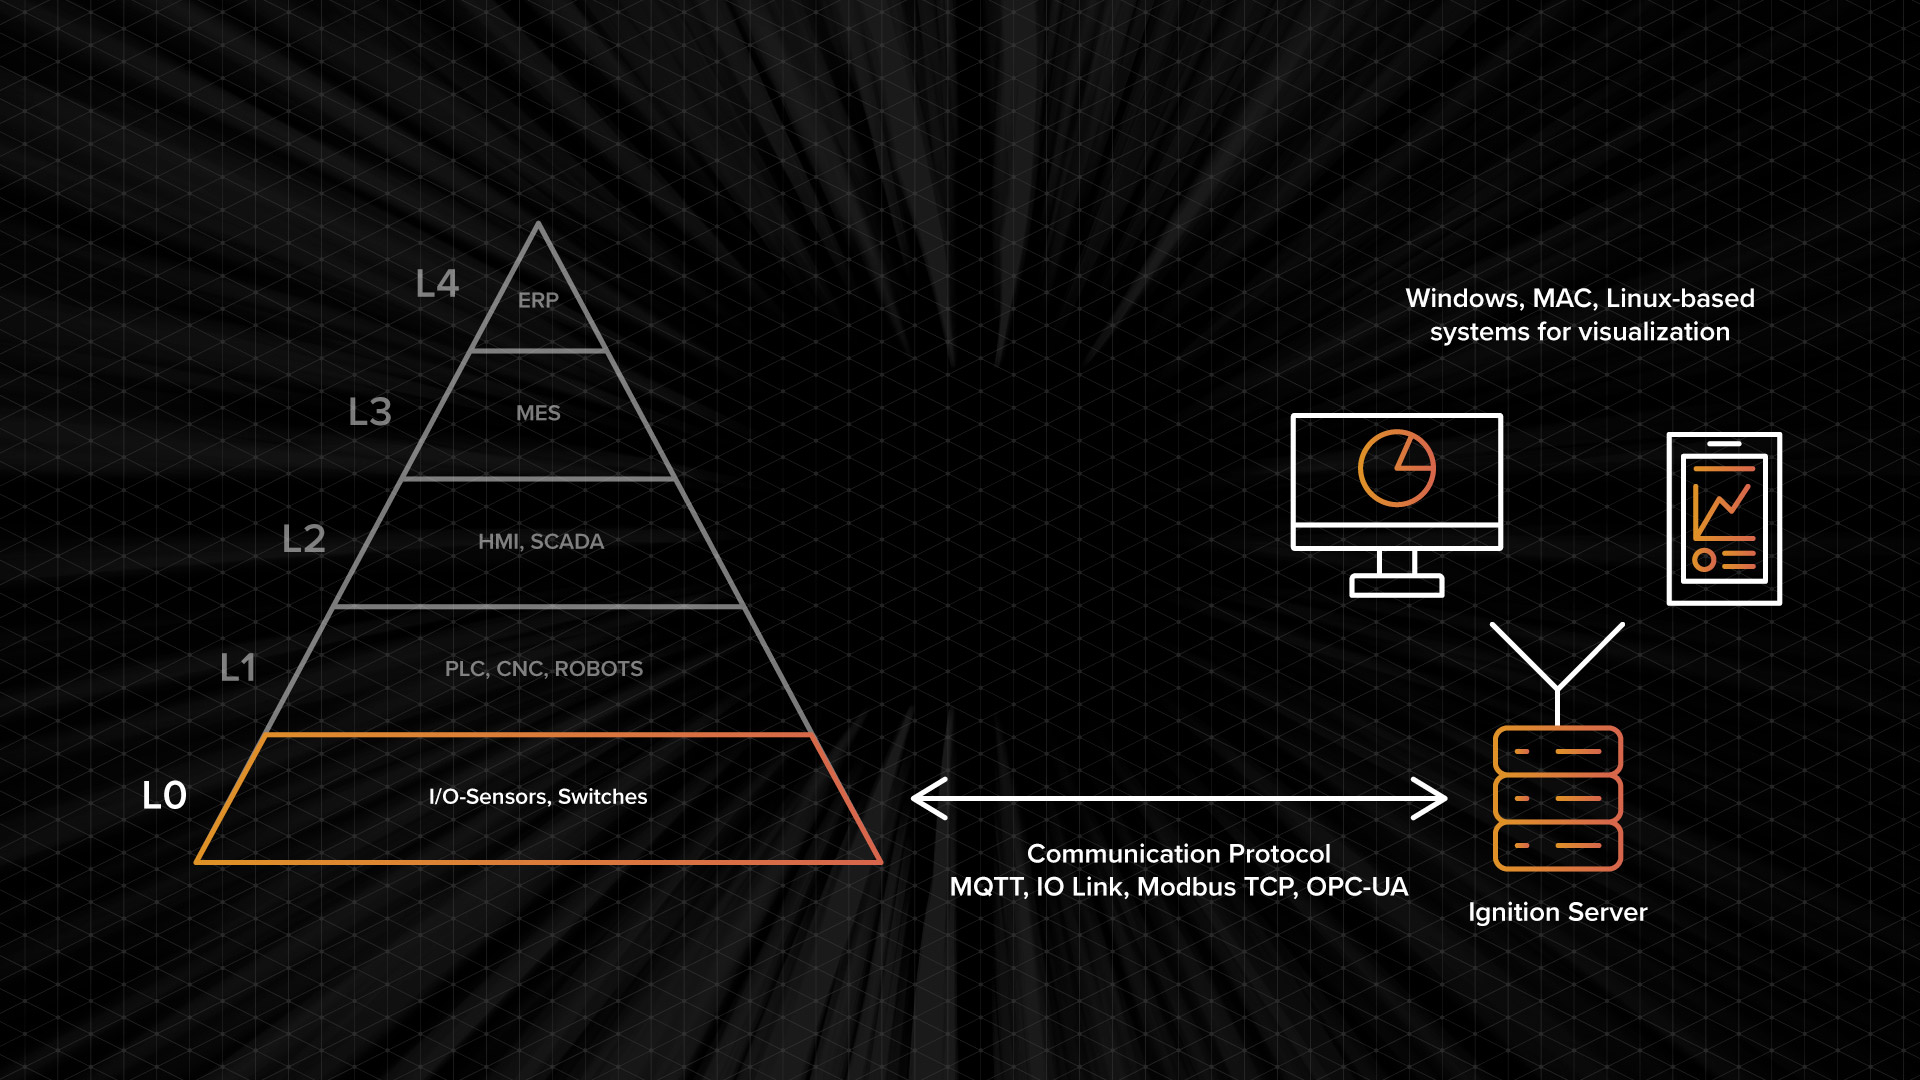 Graphic of Layer 0 of the Automation Pyramid.